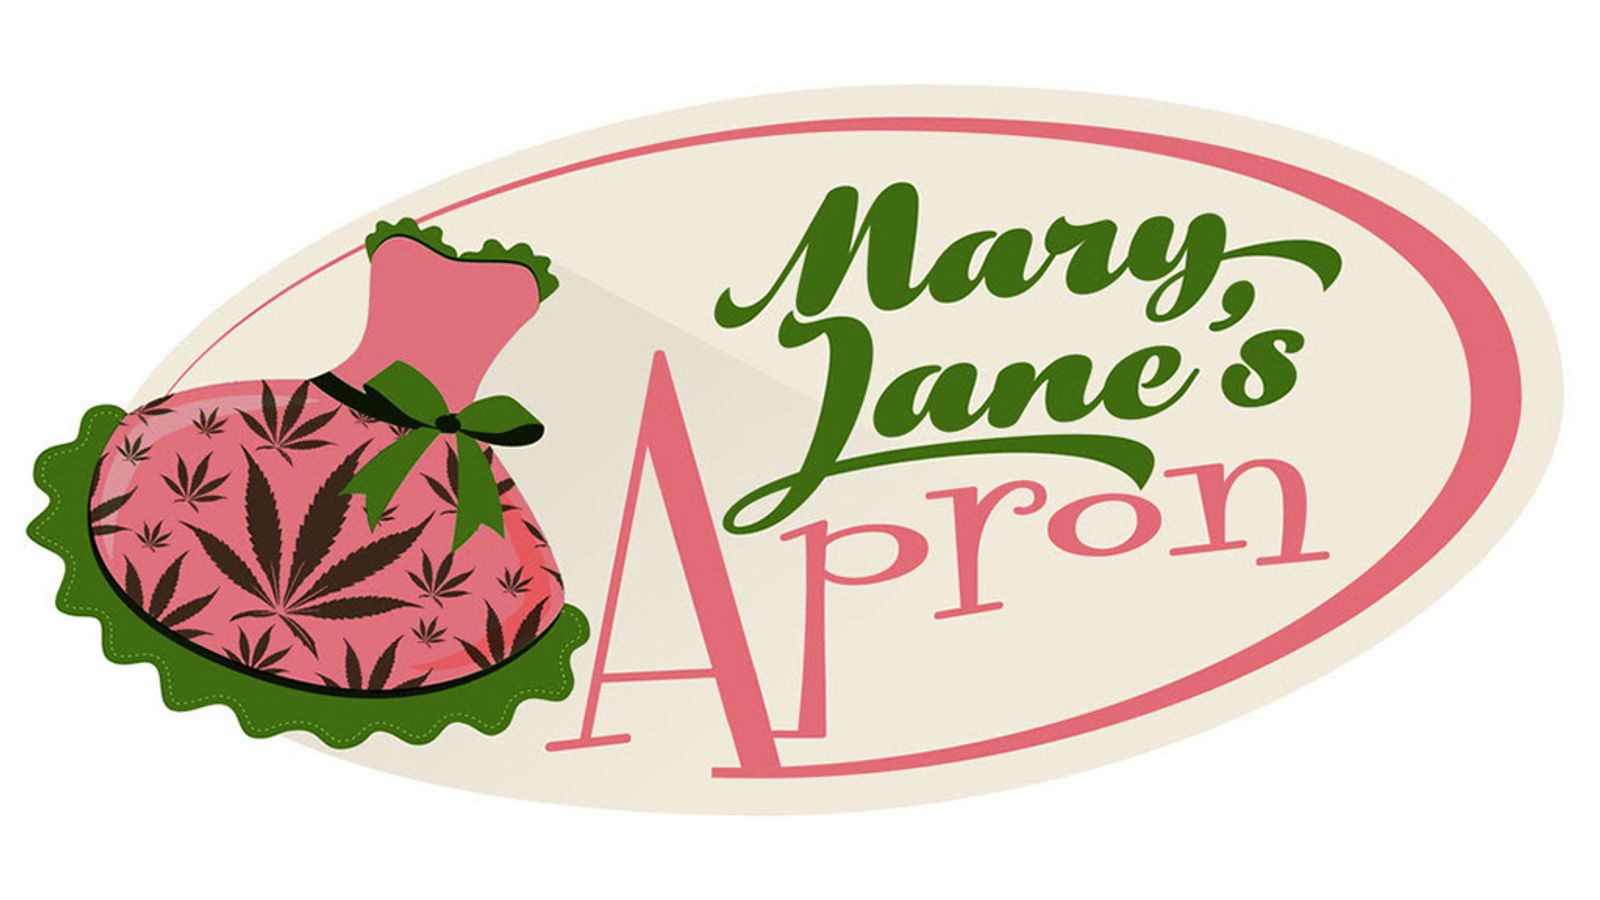 Find Out About Pot Cooking & Lifestyle At MaryJanesApron.com